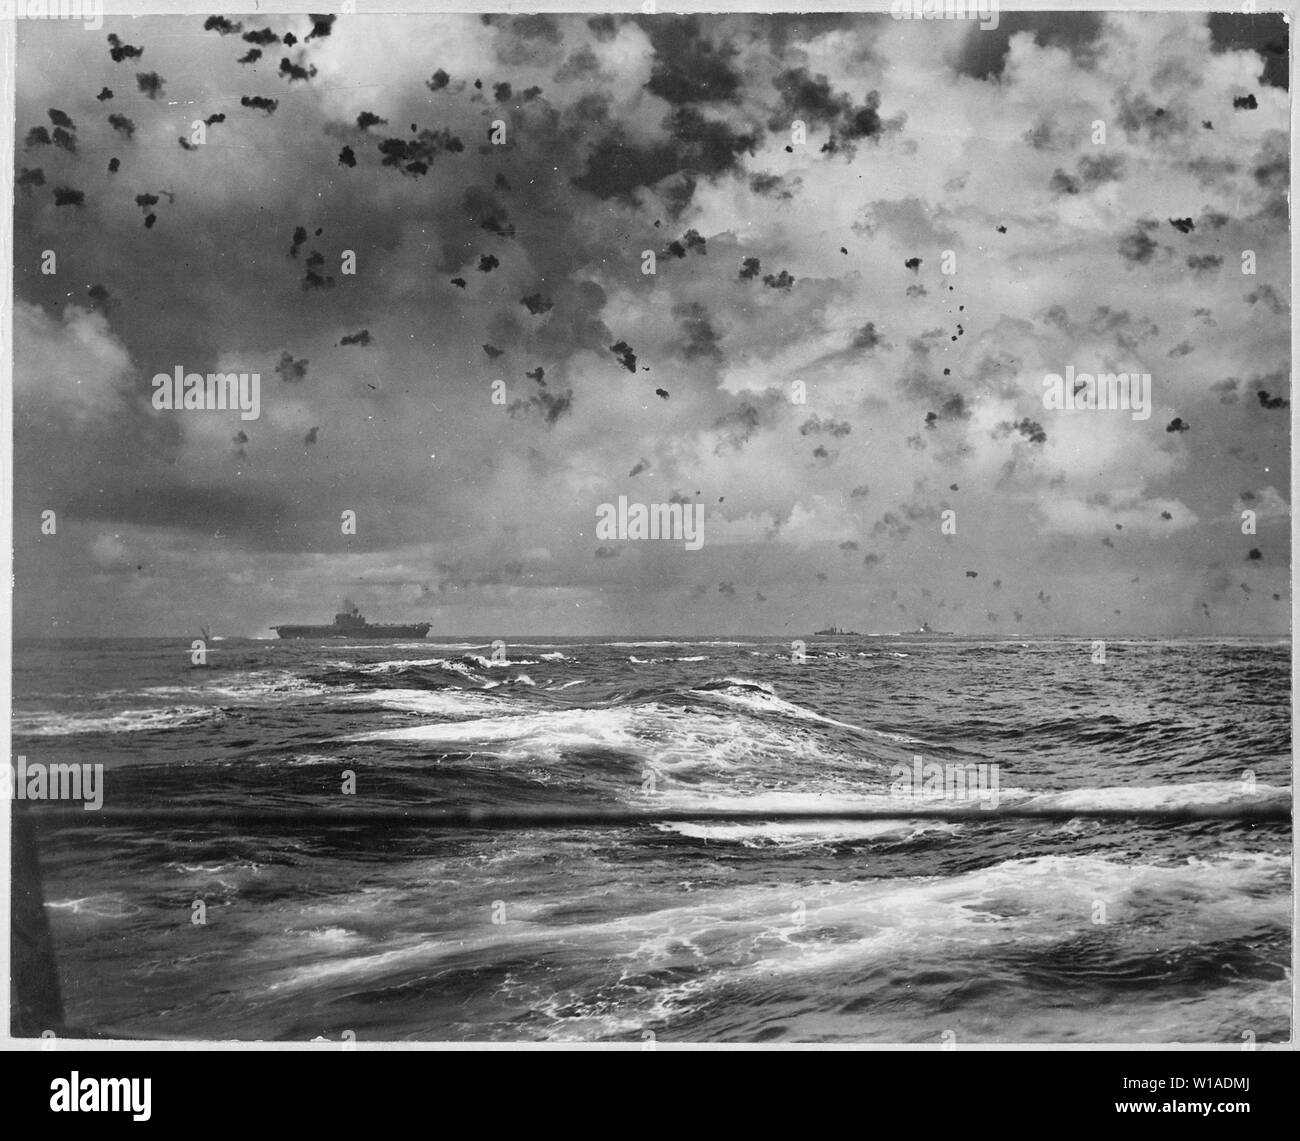 A Japanese bomb splashes astern of a U.S. carrier as the enemy plane pulls out of its dive above the carrier. In the center is another enemy plane that has made an unsuccessful dive. Battle of Santa Cruz.; General notes:  Use War and Conflict Number 977 when ordering a reproduction or requesting information about this image. Stock Photo